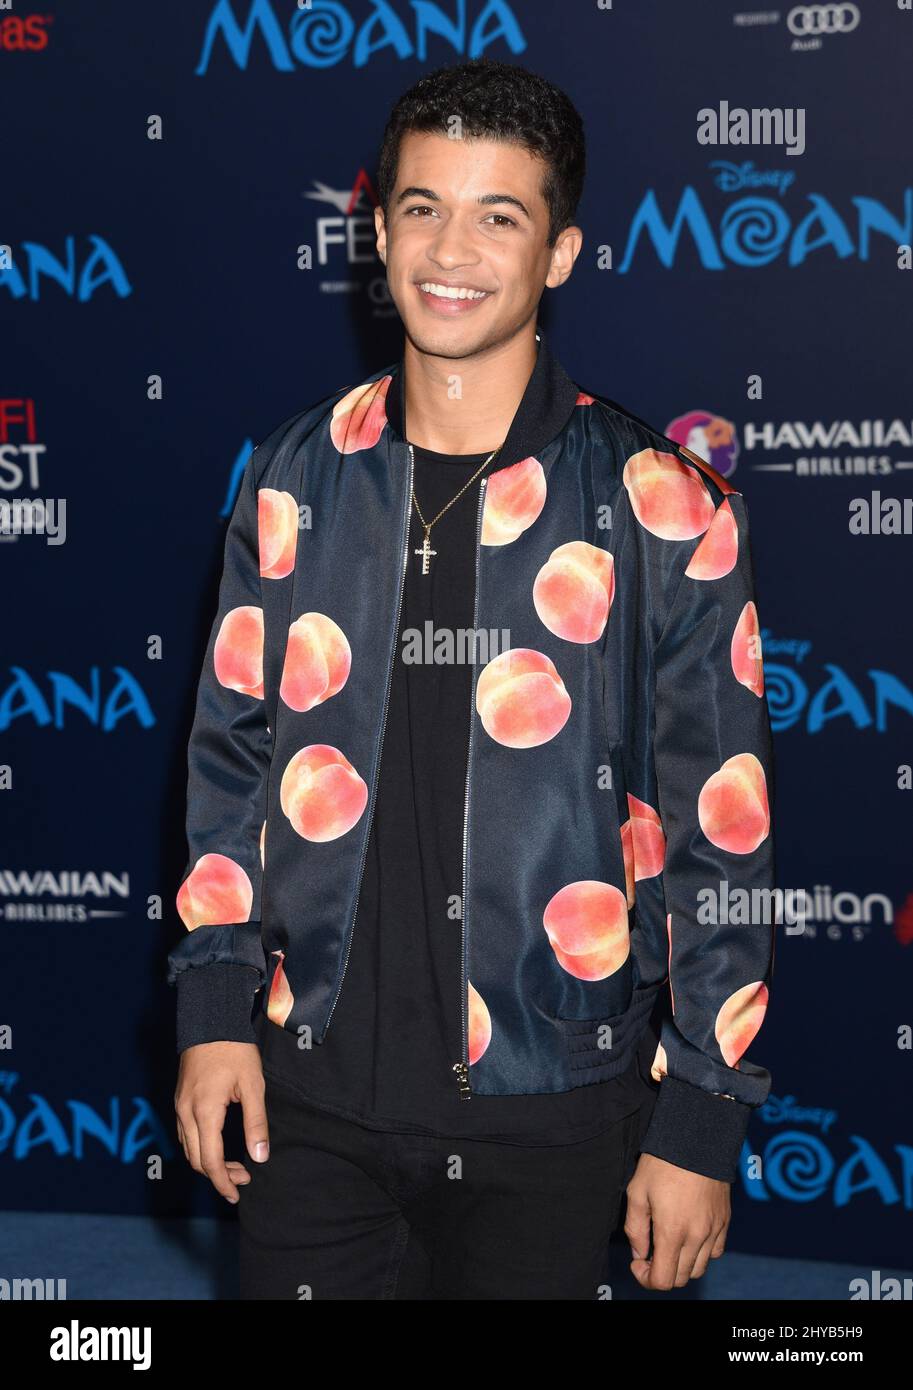 Jordan Fisher attending the Premiere of 'Moana' in Los Angeles Stock Photo  - Alamy